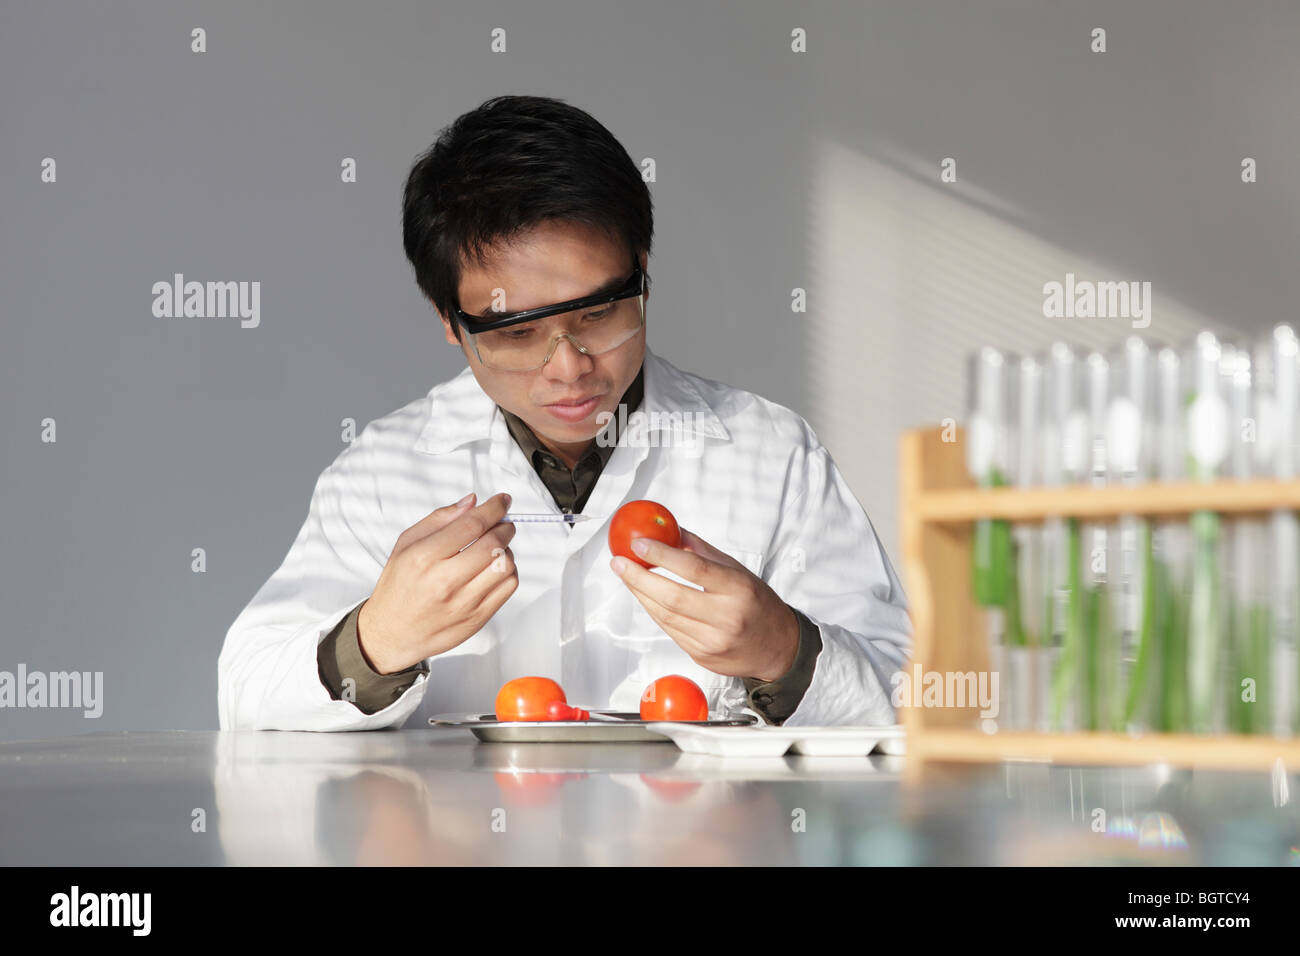 Scientist looking at tomatoes Stock Photo